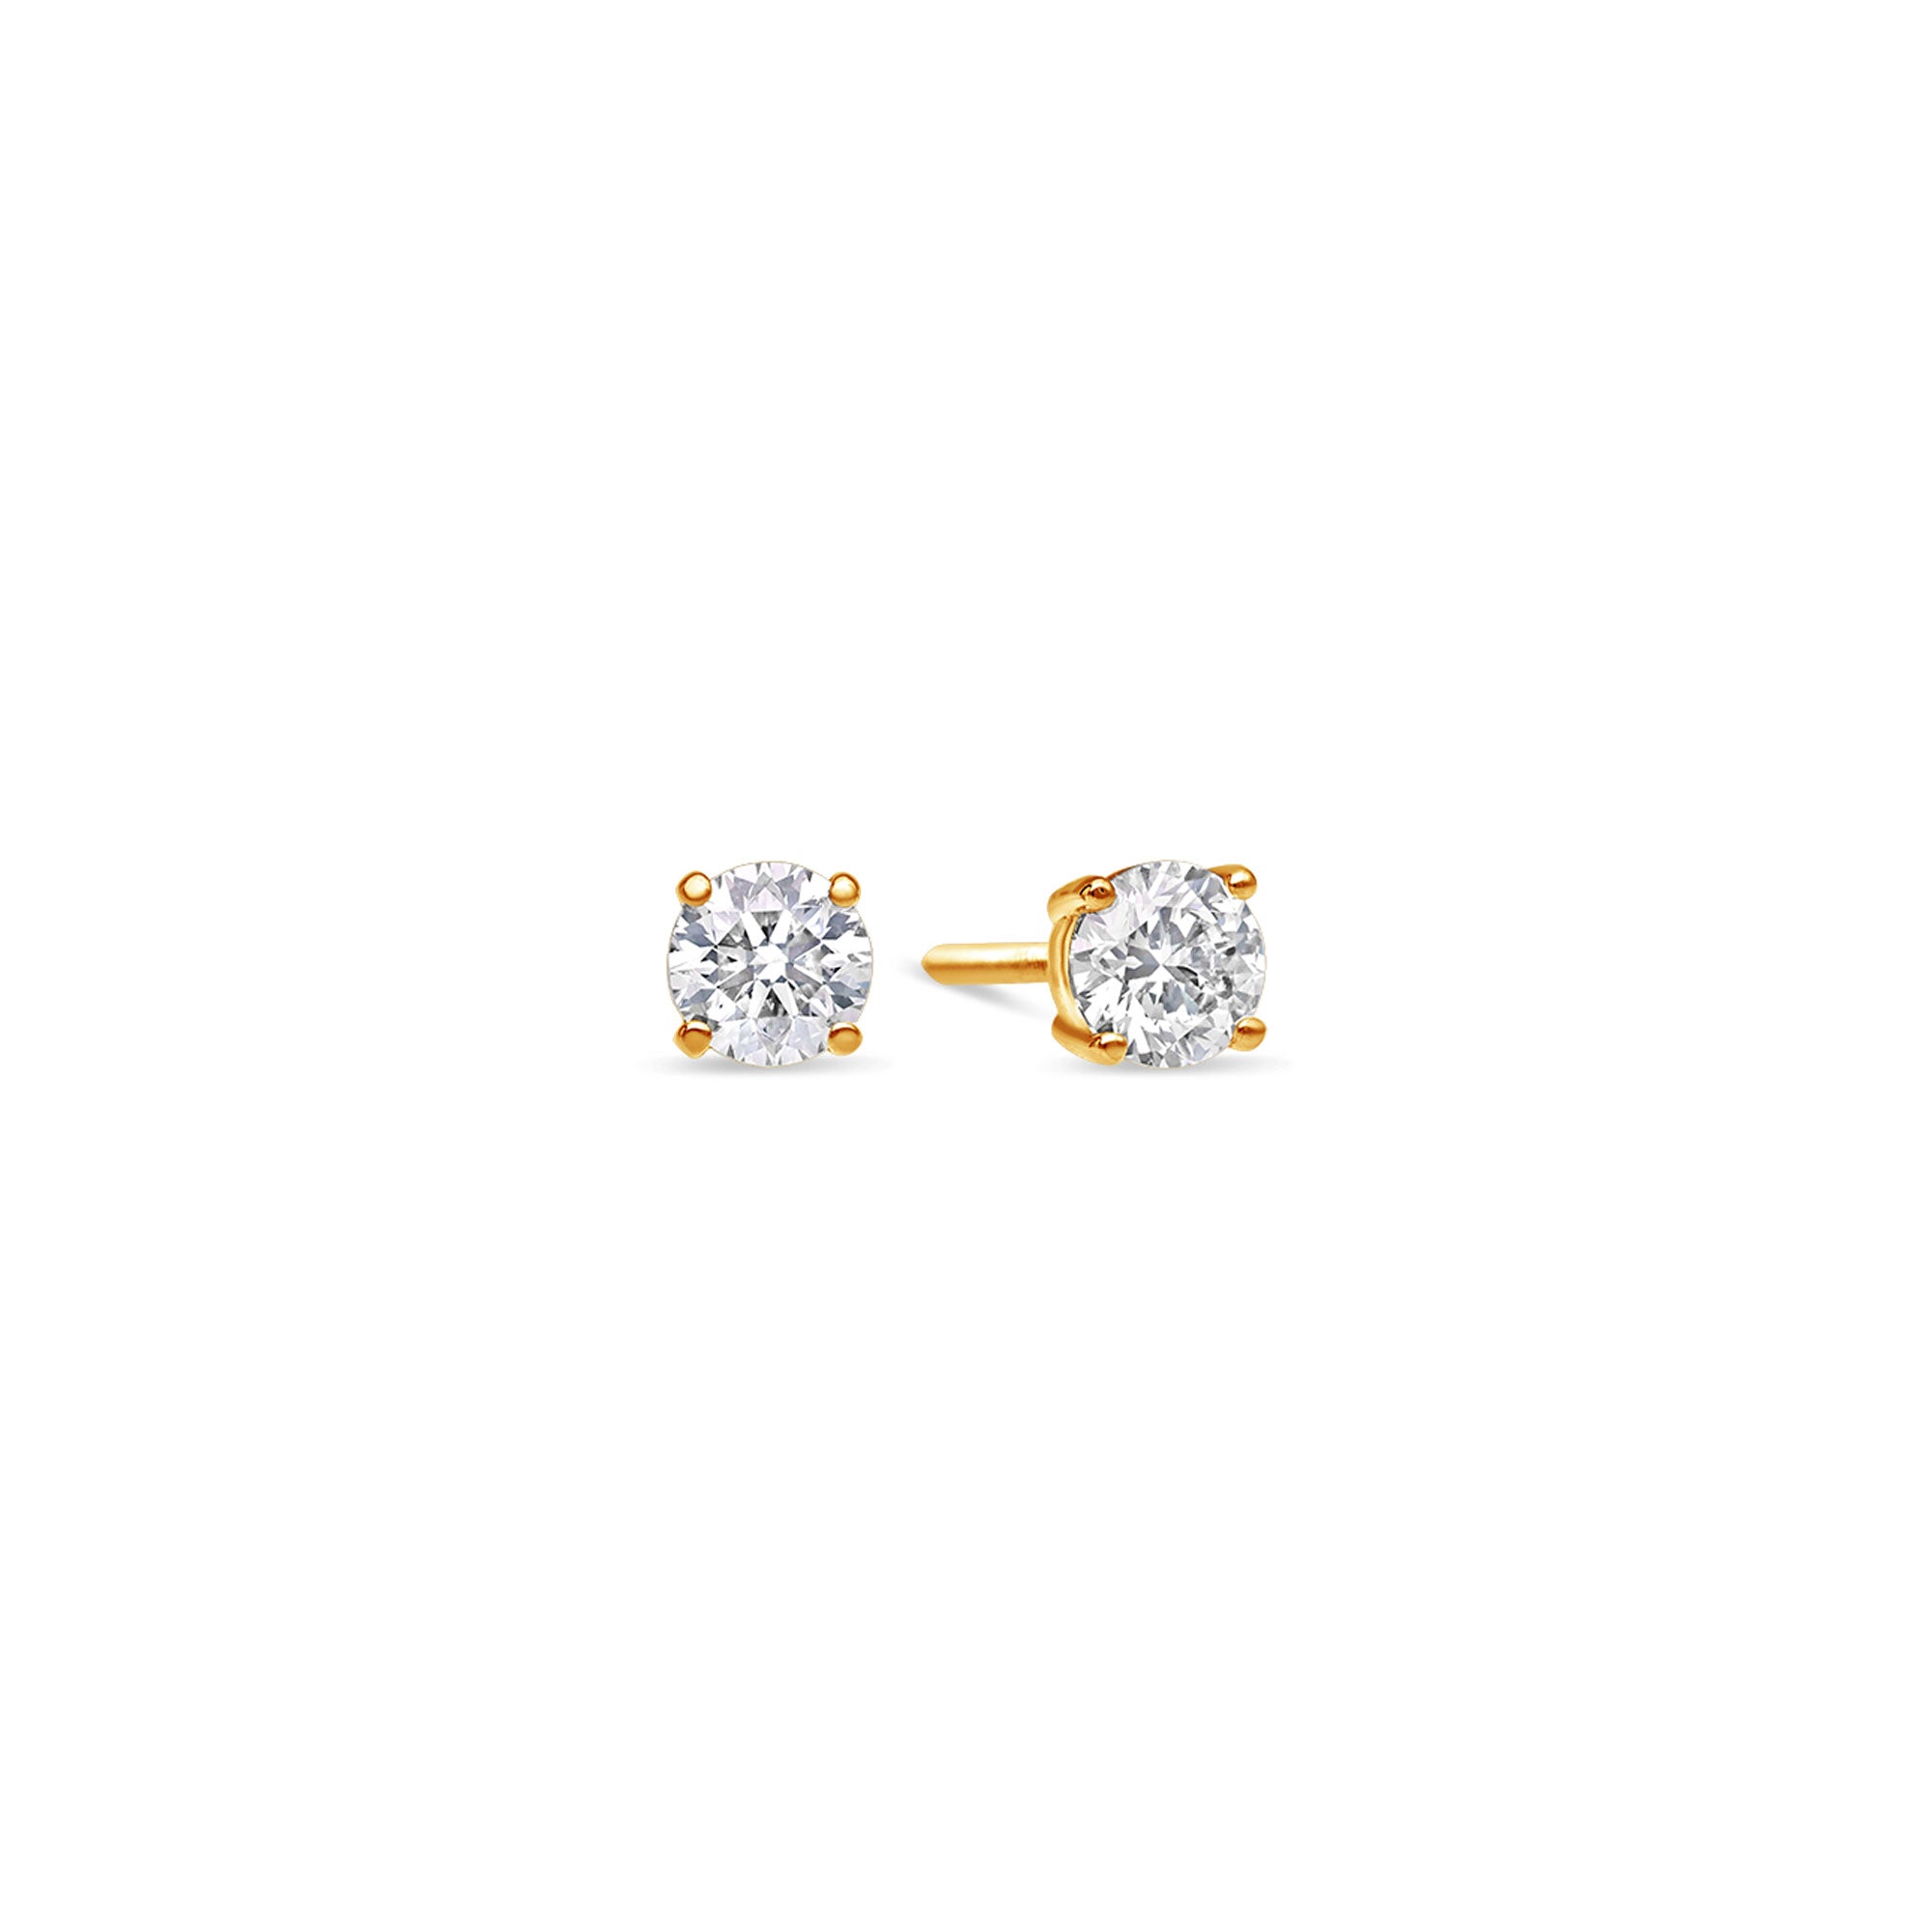 Solitaire Diamond Stud Earrings (0.50 Carat Total, Round)